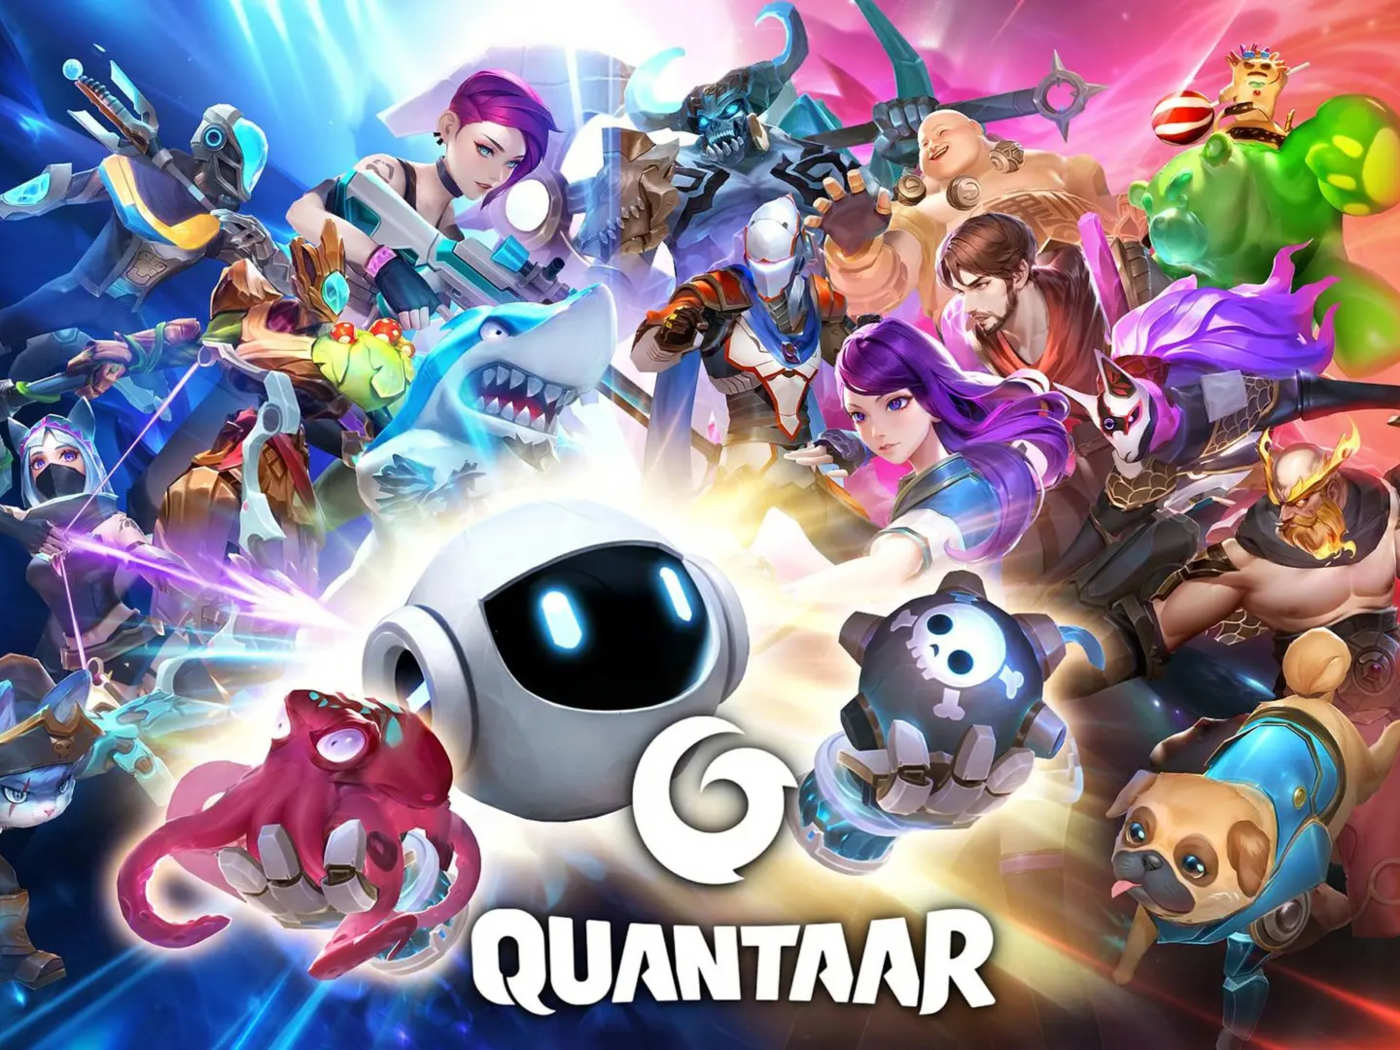 QUANTAAR: Game Introduction and FAQs